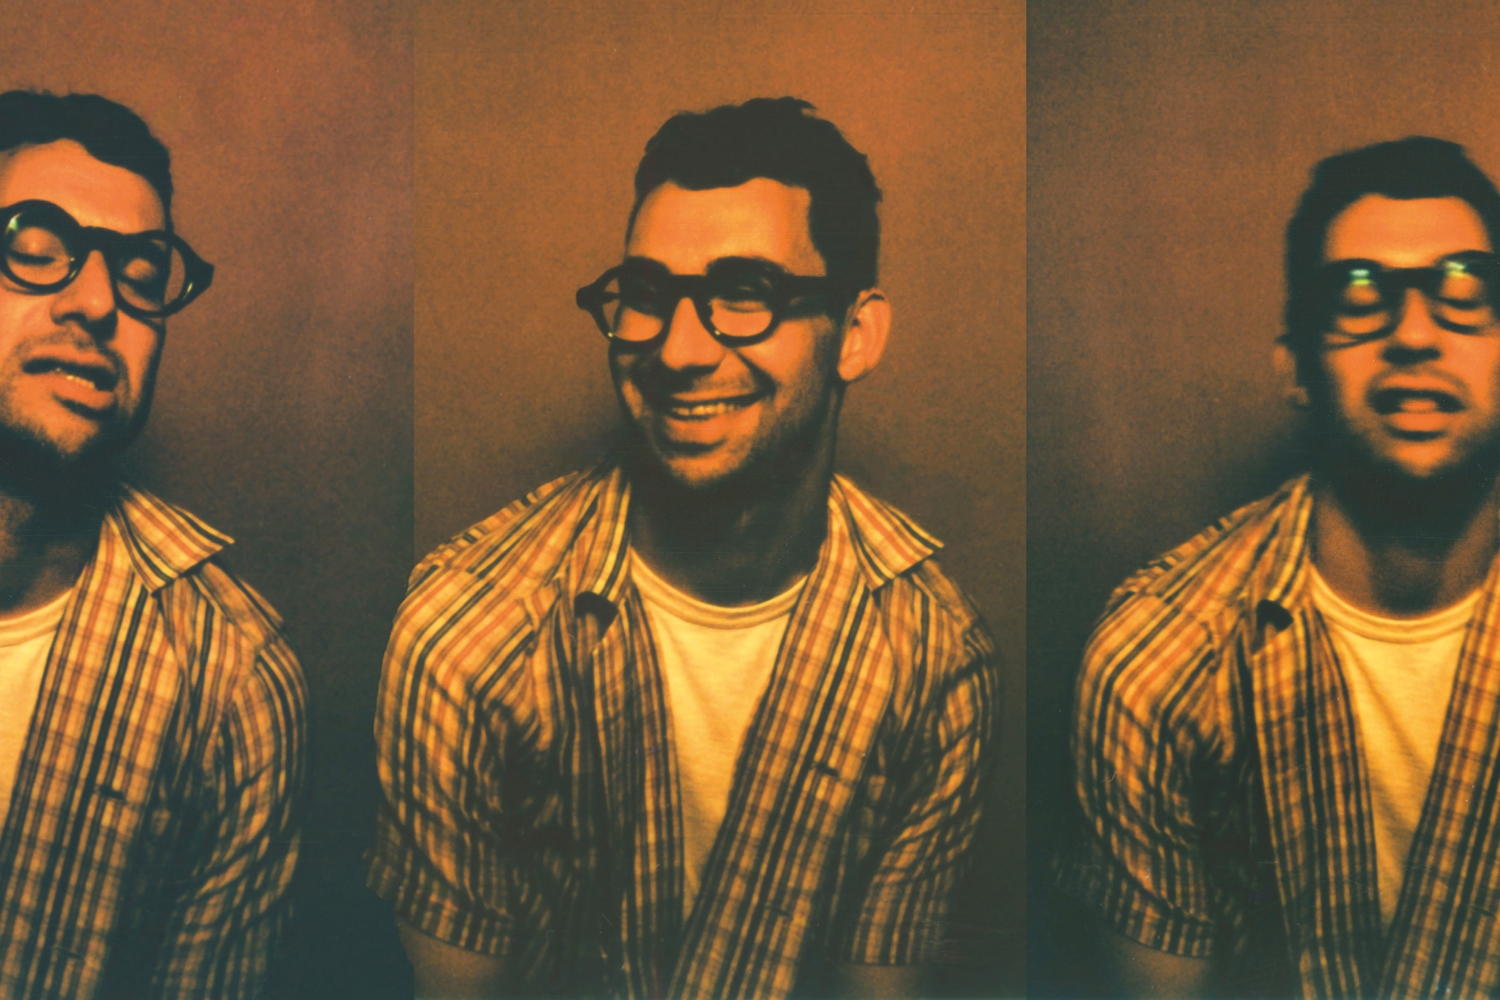 Bleachers' Jack Antonoff is on the cover of DIY's August 2021 issue